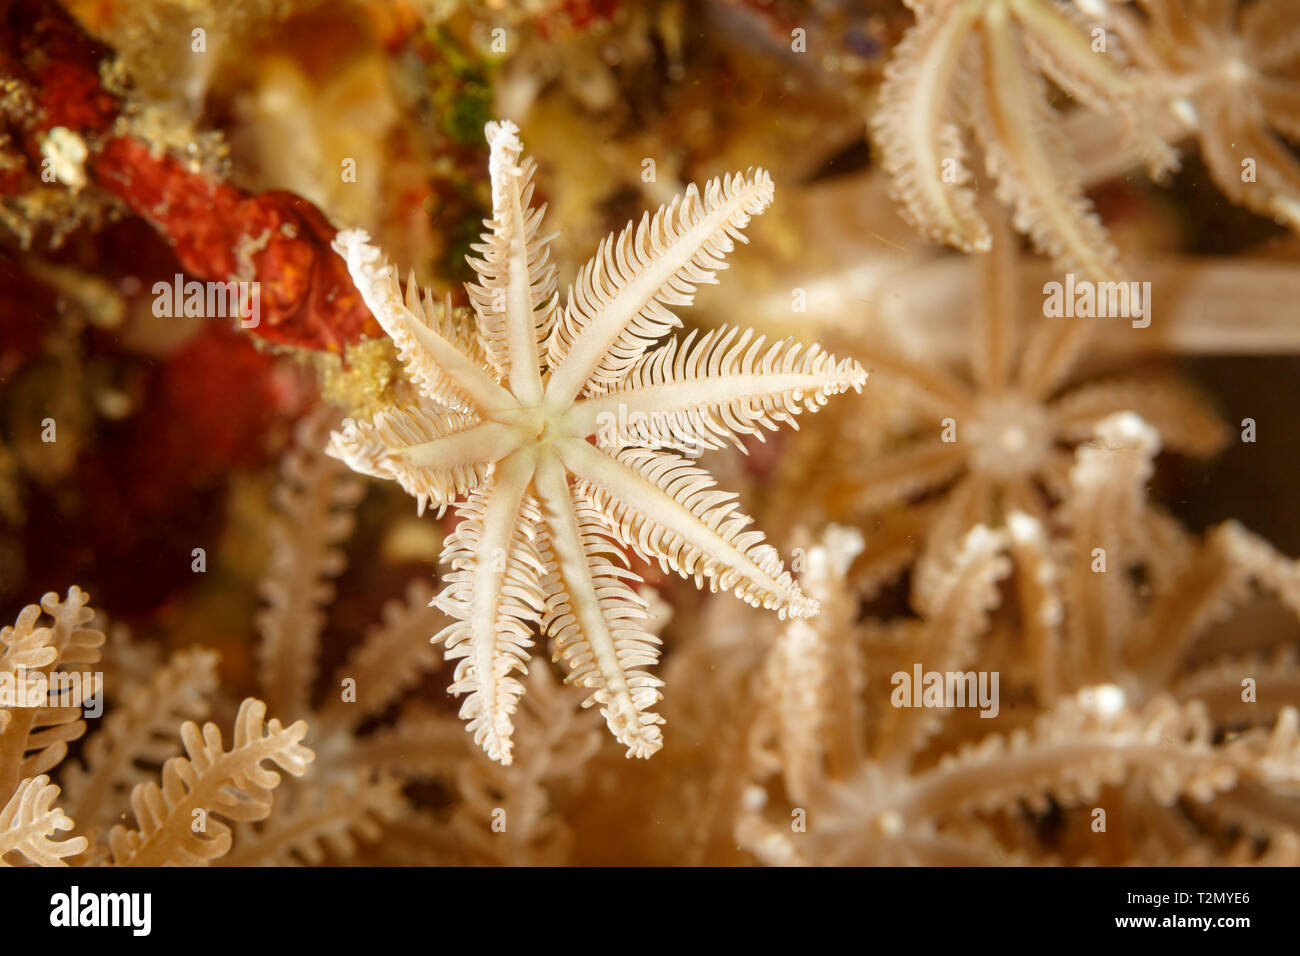 Closeup of white polyps on a tree fern coral Cyathea, dryopteroides, clavularia  also called a palm coral with a red nudibranch hiding behind Stock Photo